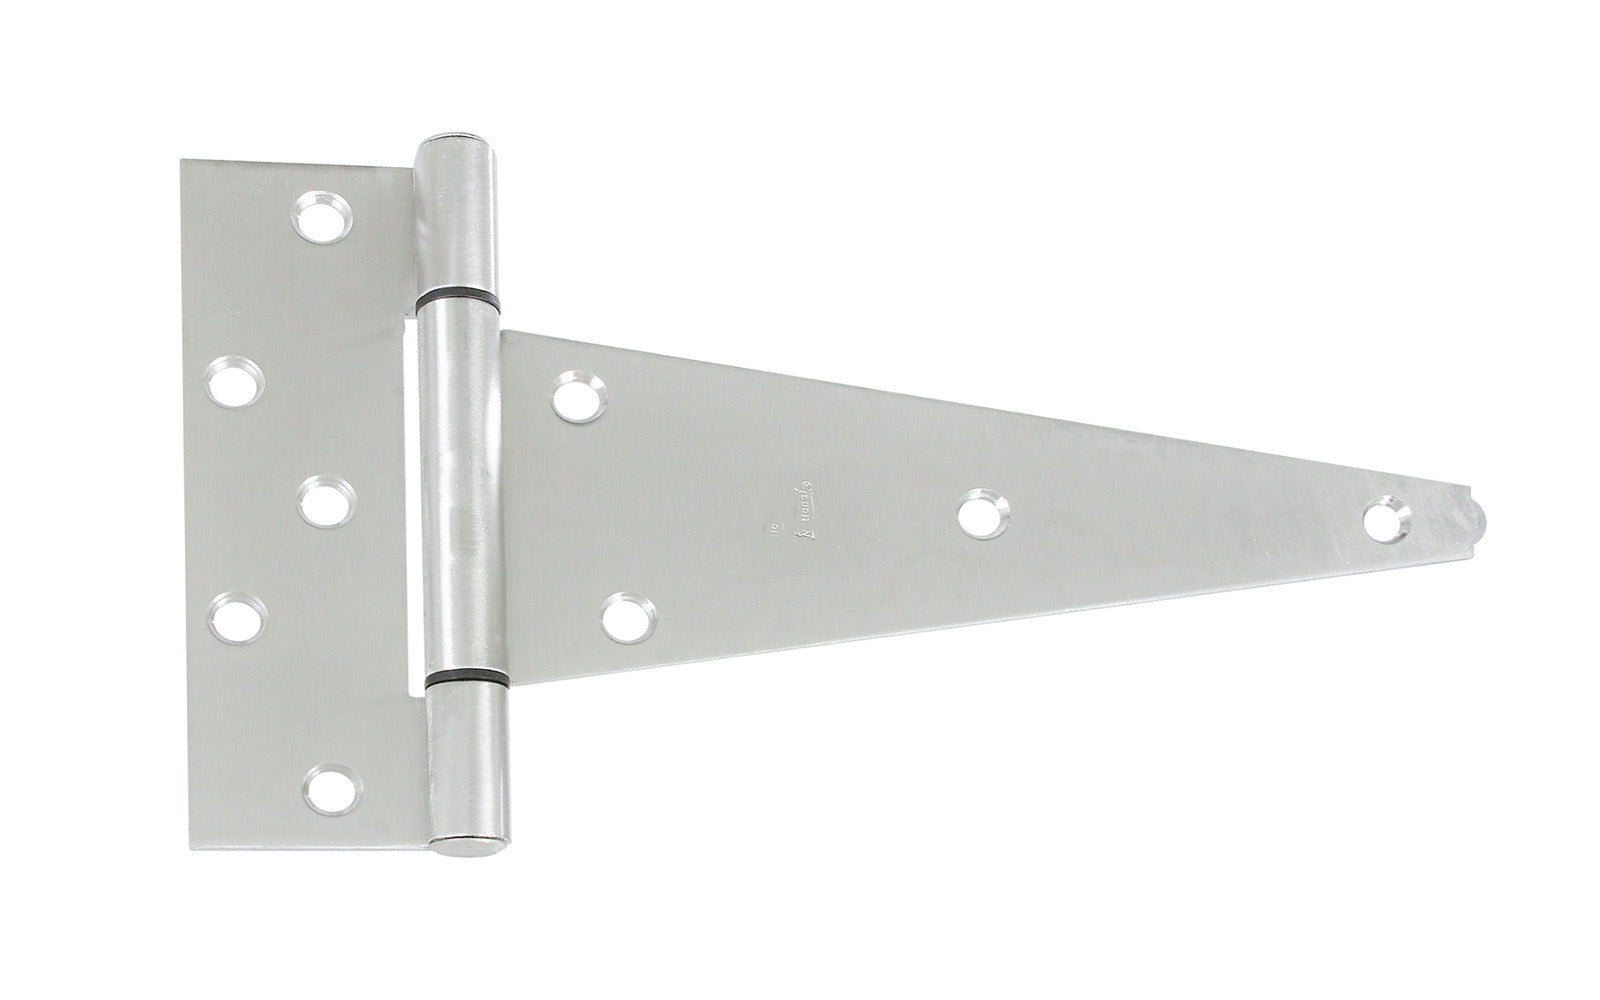 Heavy duty stainless T-hinge is for applications with wide mounting surfaces. Tight pin for right or left hand applications. Rust-resistant; ACQ safe - safe for use with premium woods like cedar & redwood. Bearing design eliminates metal-to-metal contact for smooth, quiet operation. Available in 4", 6", 8" & 10" sizes